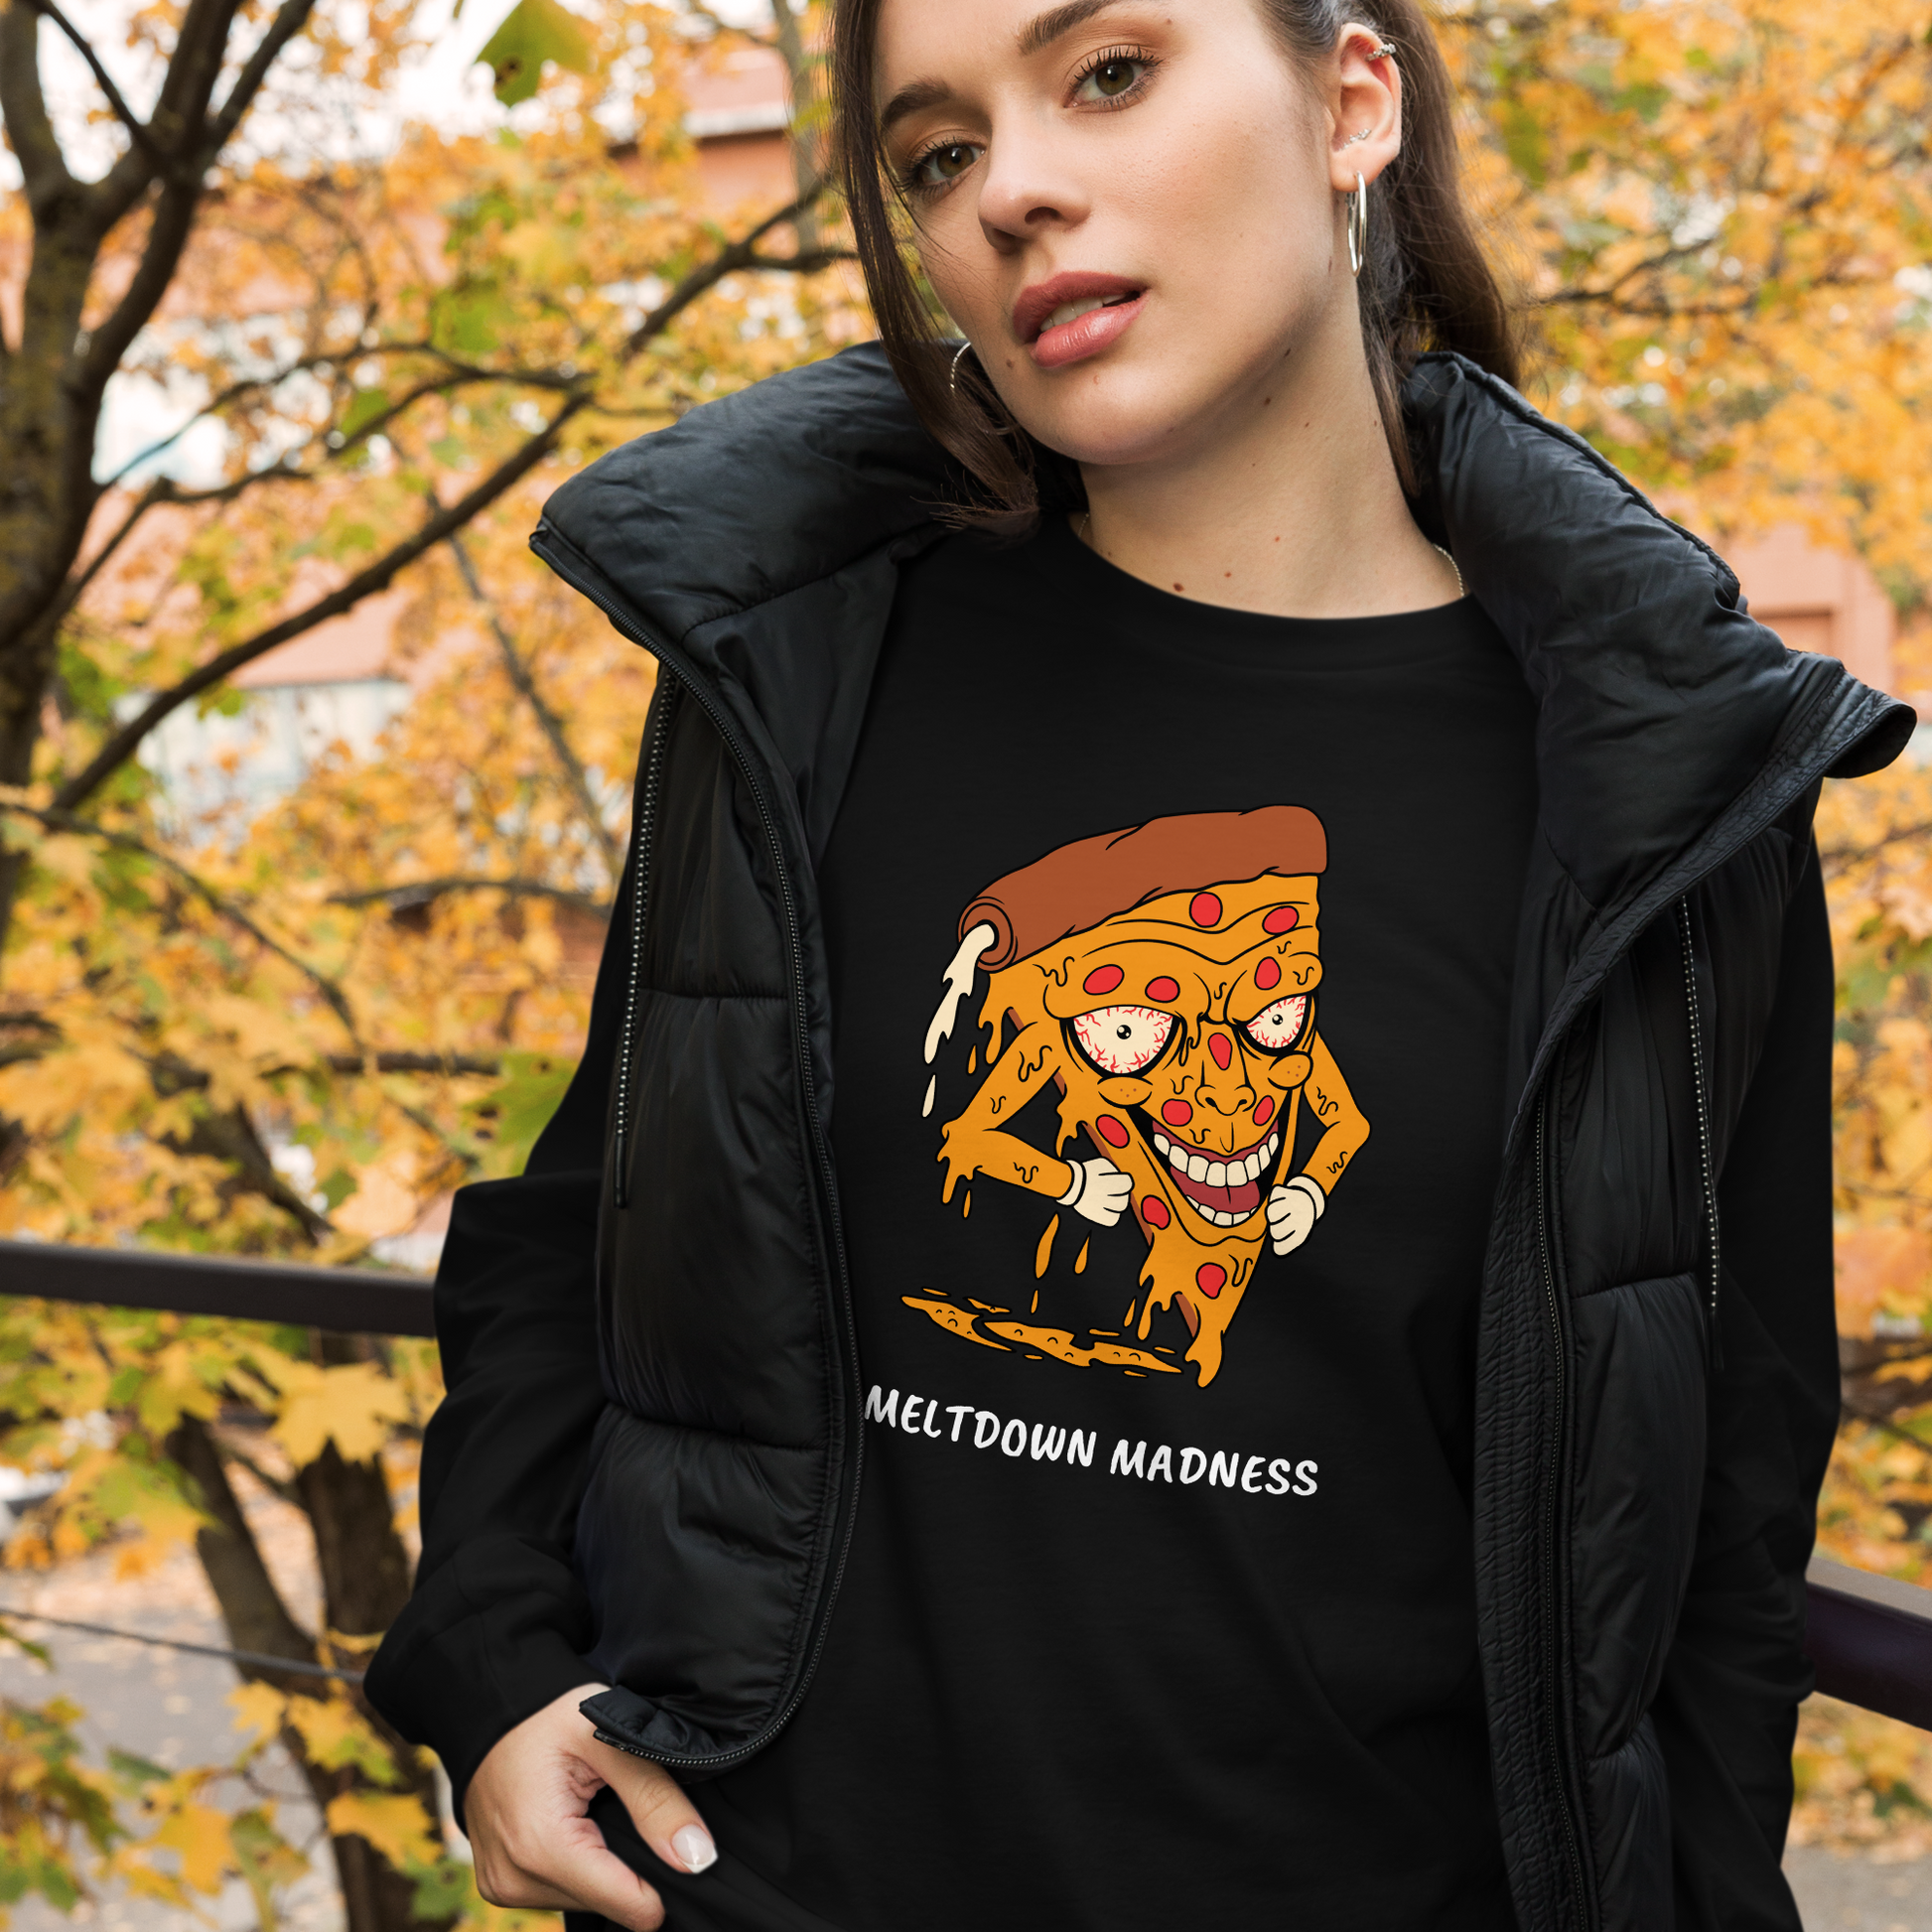 Woman wearing a Black Melting Pizza Long Sleeve Tee featuring a Meltdown Madness graphic on the chest - Funny Pizza Long Sleeve Graphic Tees - Boozy Fox